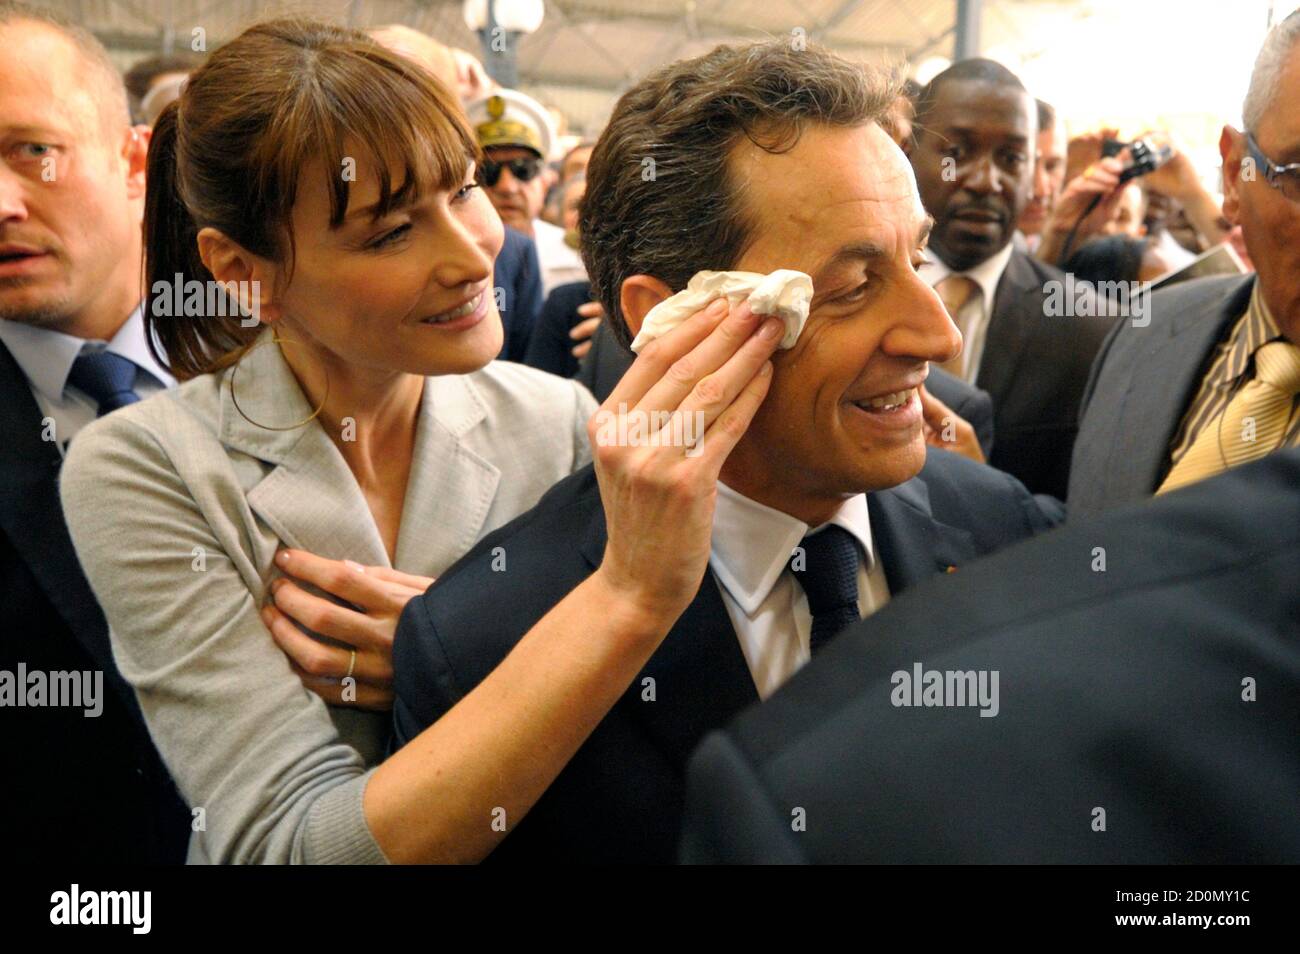 France's First Lady Carla Bruni-Sarkozy wipes the brow of her husband,  France's President Nicolas Sarkozy, as they visit a market in  Fort-de-France on the Martinique island January 8, 2011. Sarkozy and his